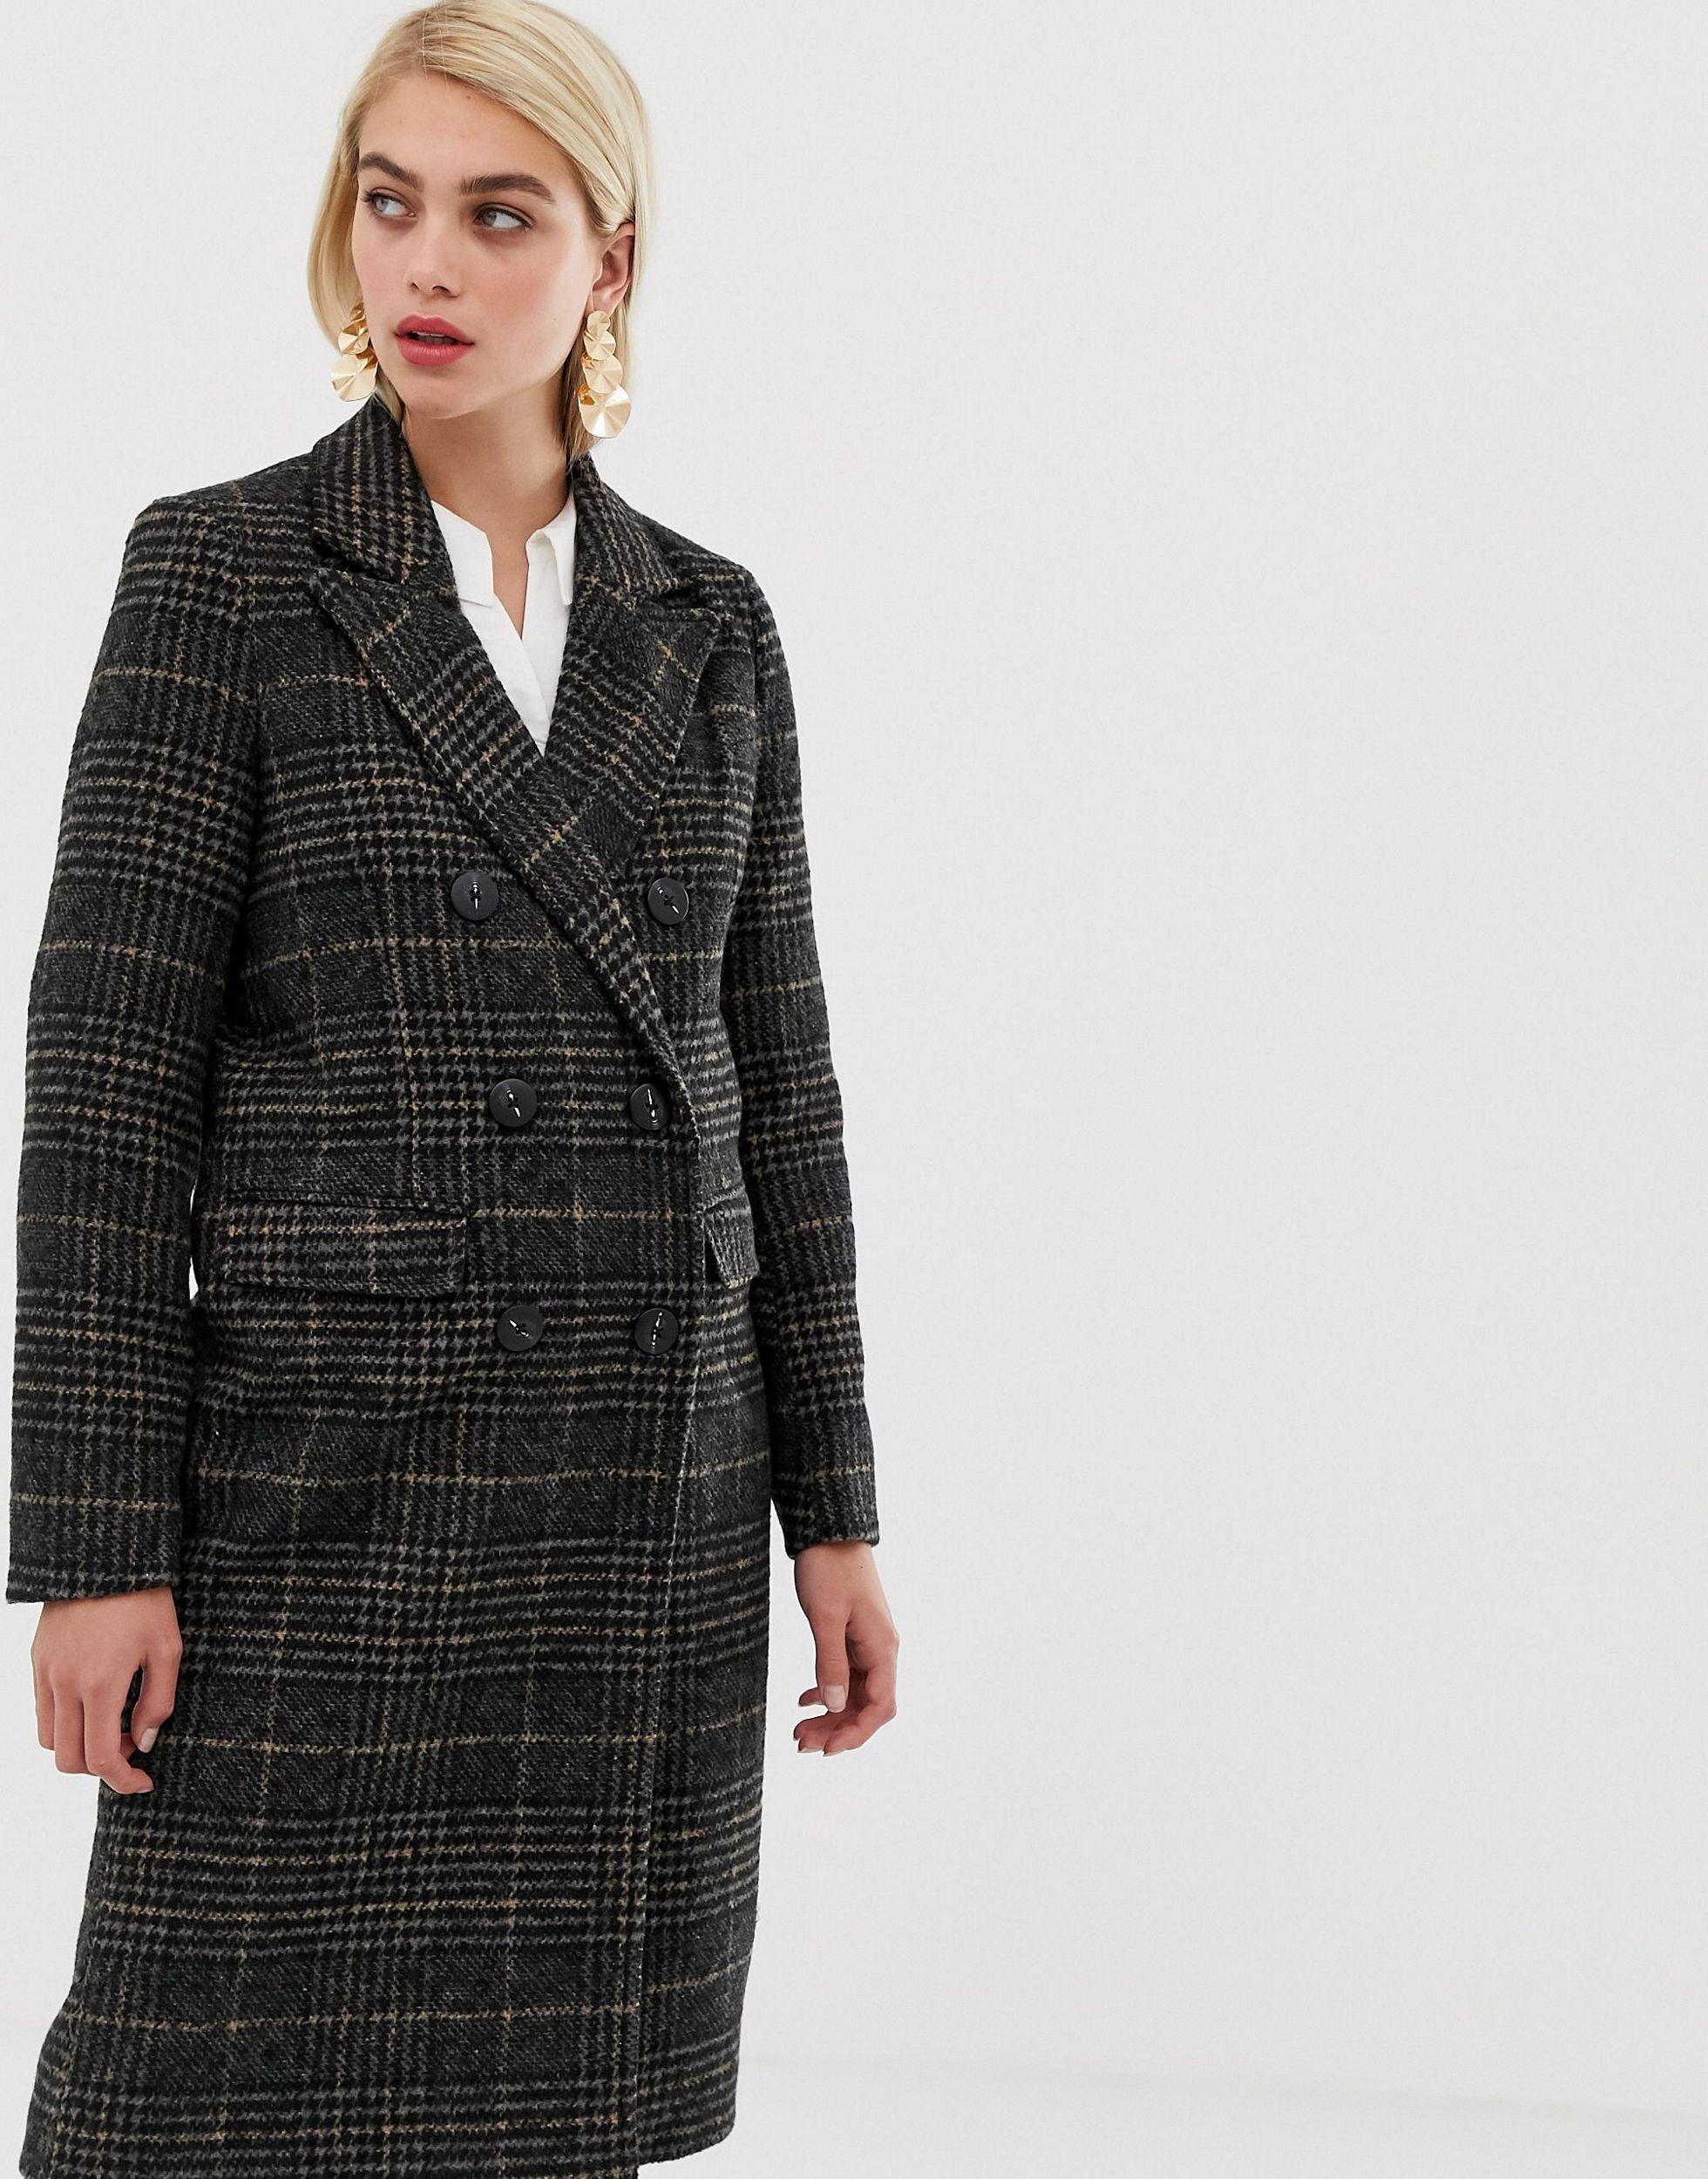 Vero Moda Synthetic Check Tailored Coat in Brown - Lyst